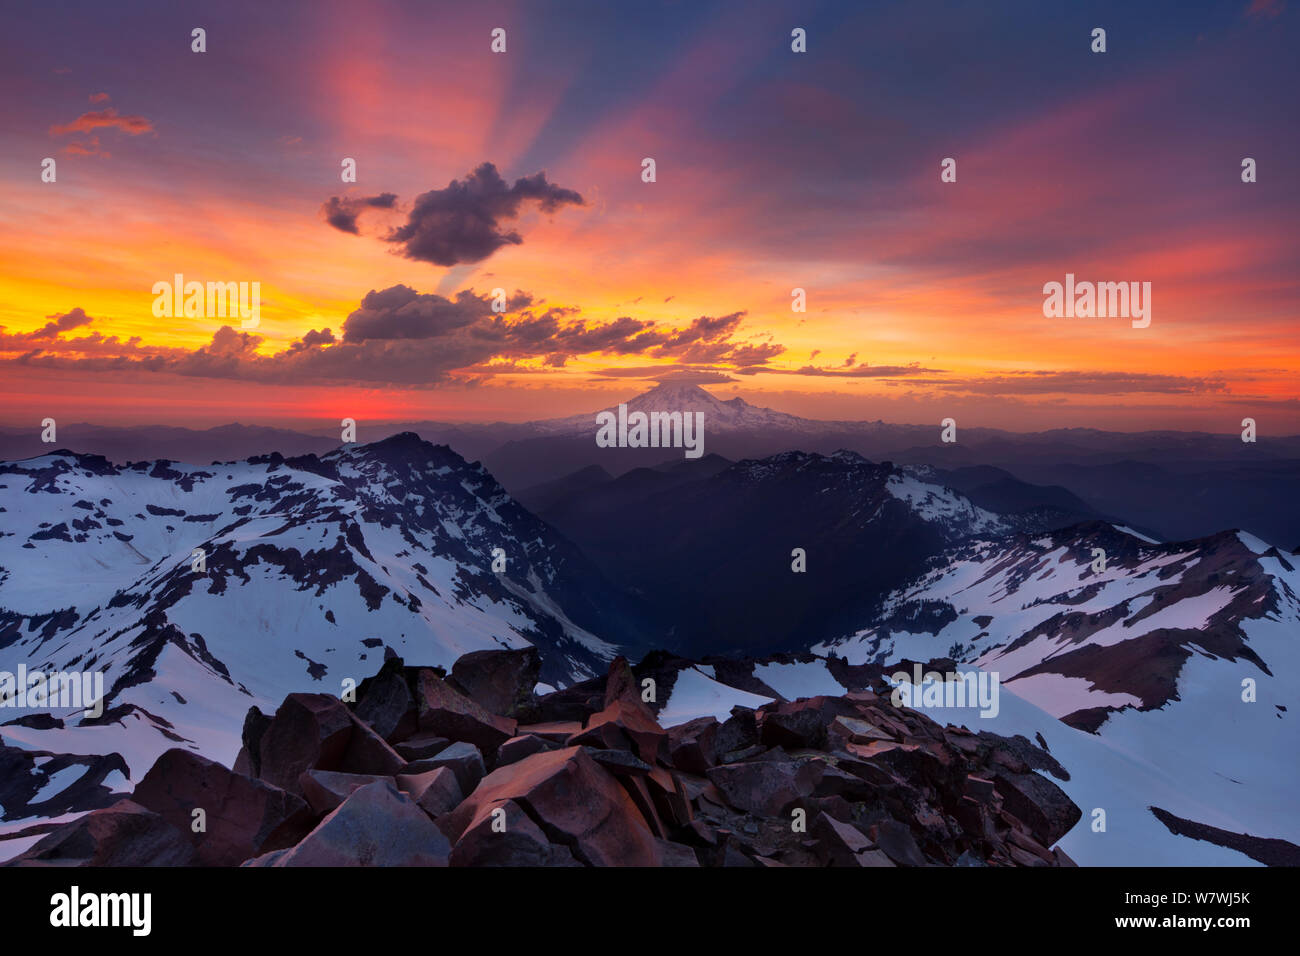 Mount Rainier at sunset, seen from the summit of Old Snowy Mountain in the Goat Rocks Wilderness of the Cascades in Washington, USA. July 2012. Stock Photo